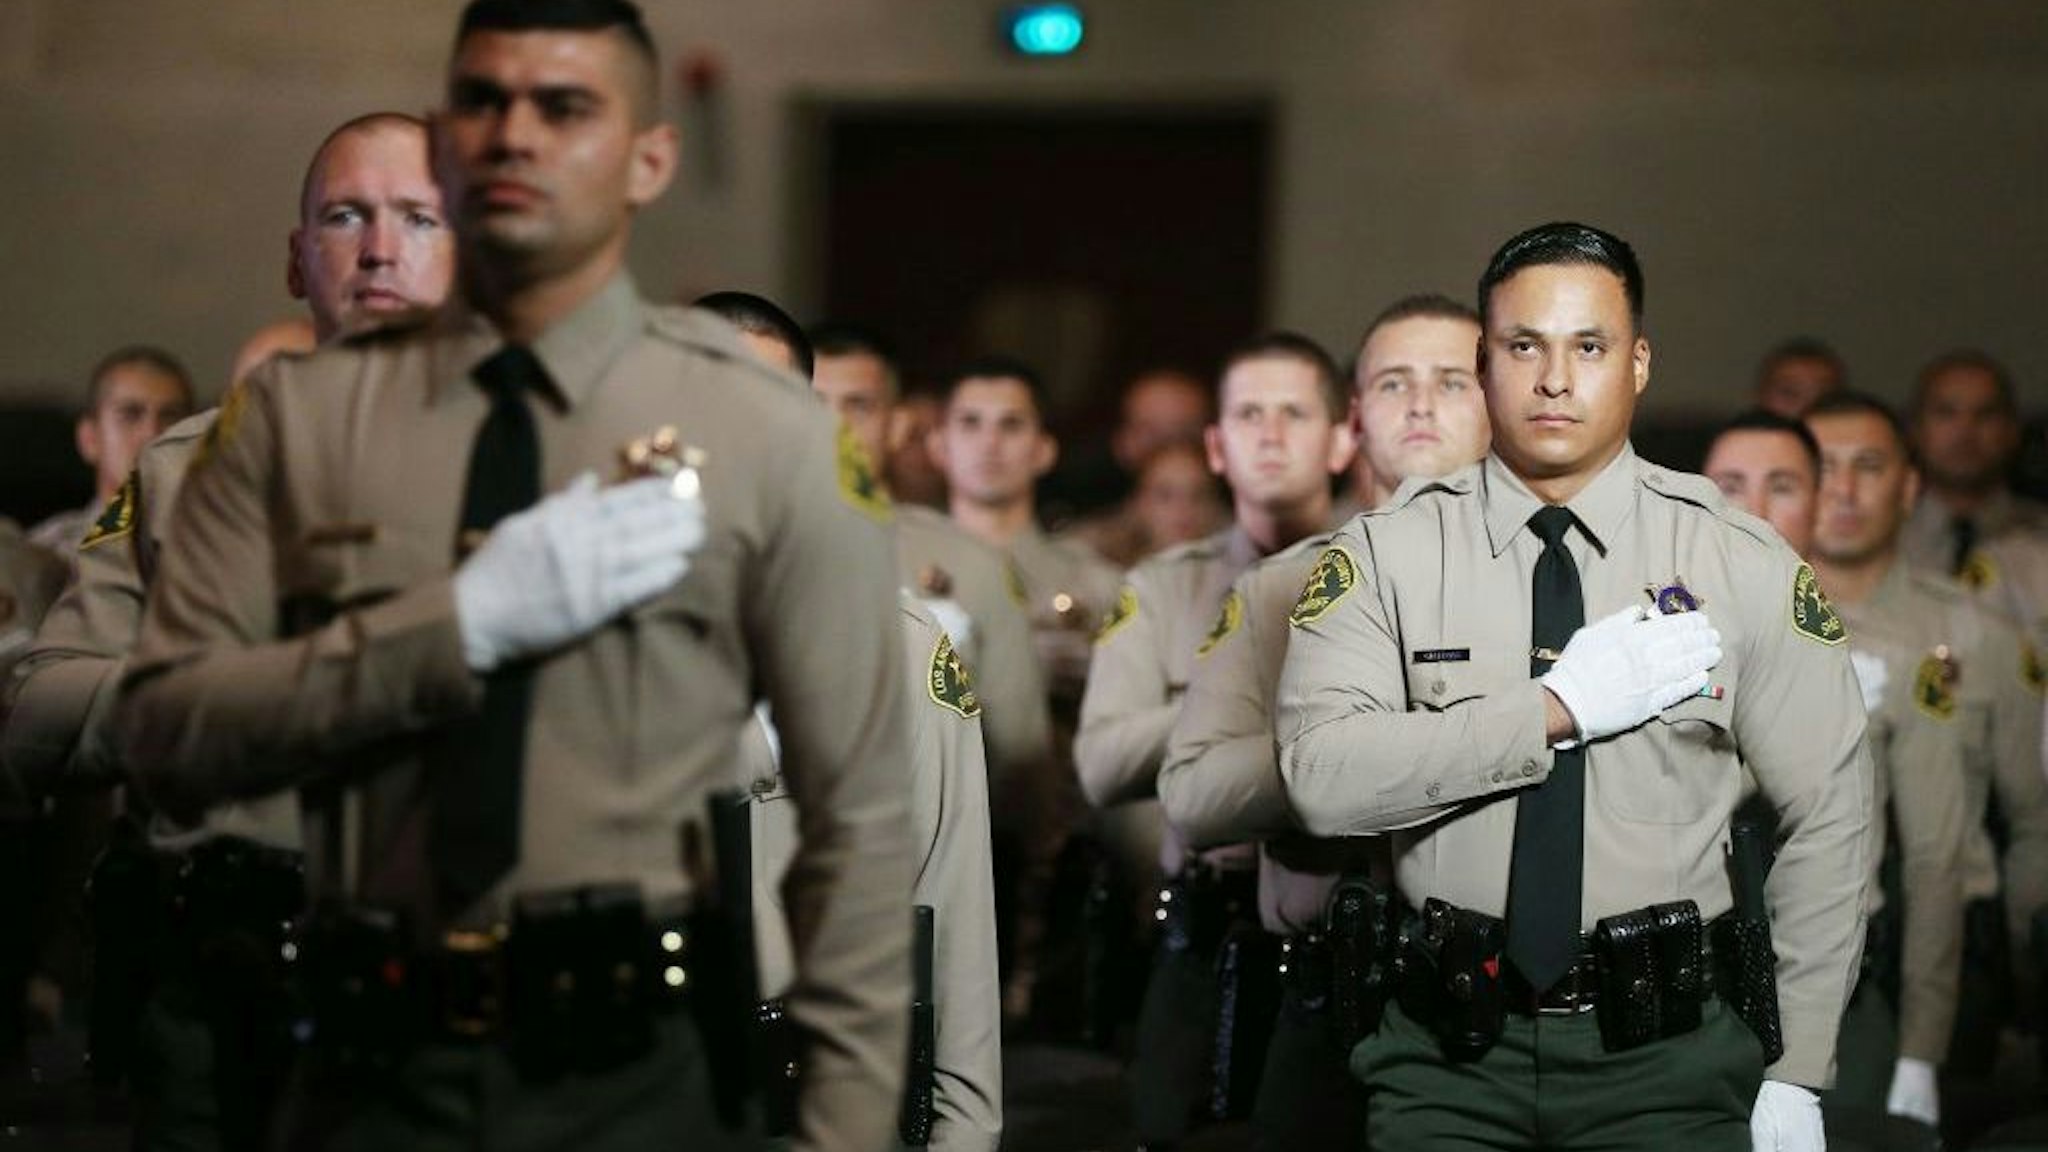 MONTEREY PARK, CALIFORNIA - AUGUST 21: Graduates of Los Angeles County Sheriff's Department Academy Class 451 stand for the pledge of allegiance at their graduation ceremony at East Los Angeles College amid the COVID-19 pandemic on August 21, 2020 in Monterey Park, California. Graduates were seated with social distancing and family members were not allowed inside the ceremony due to restrictions in place to prevent the spread of the coronavirus. (Photo by Mario Tama/Getty Images)